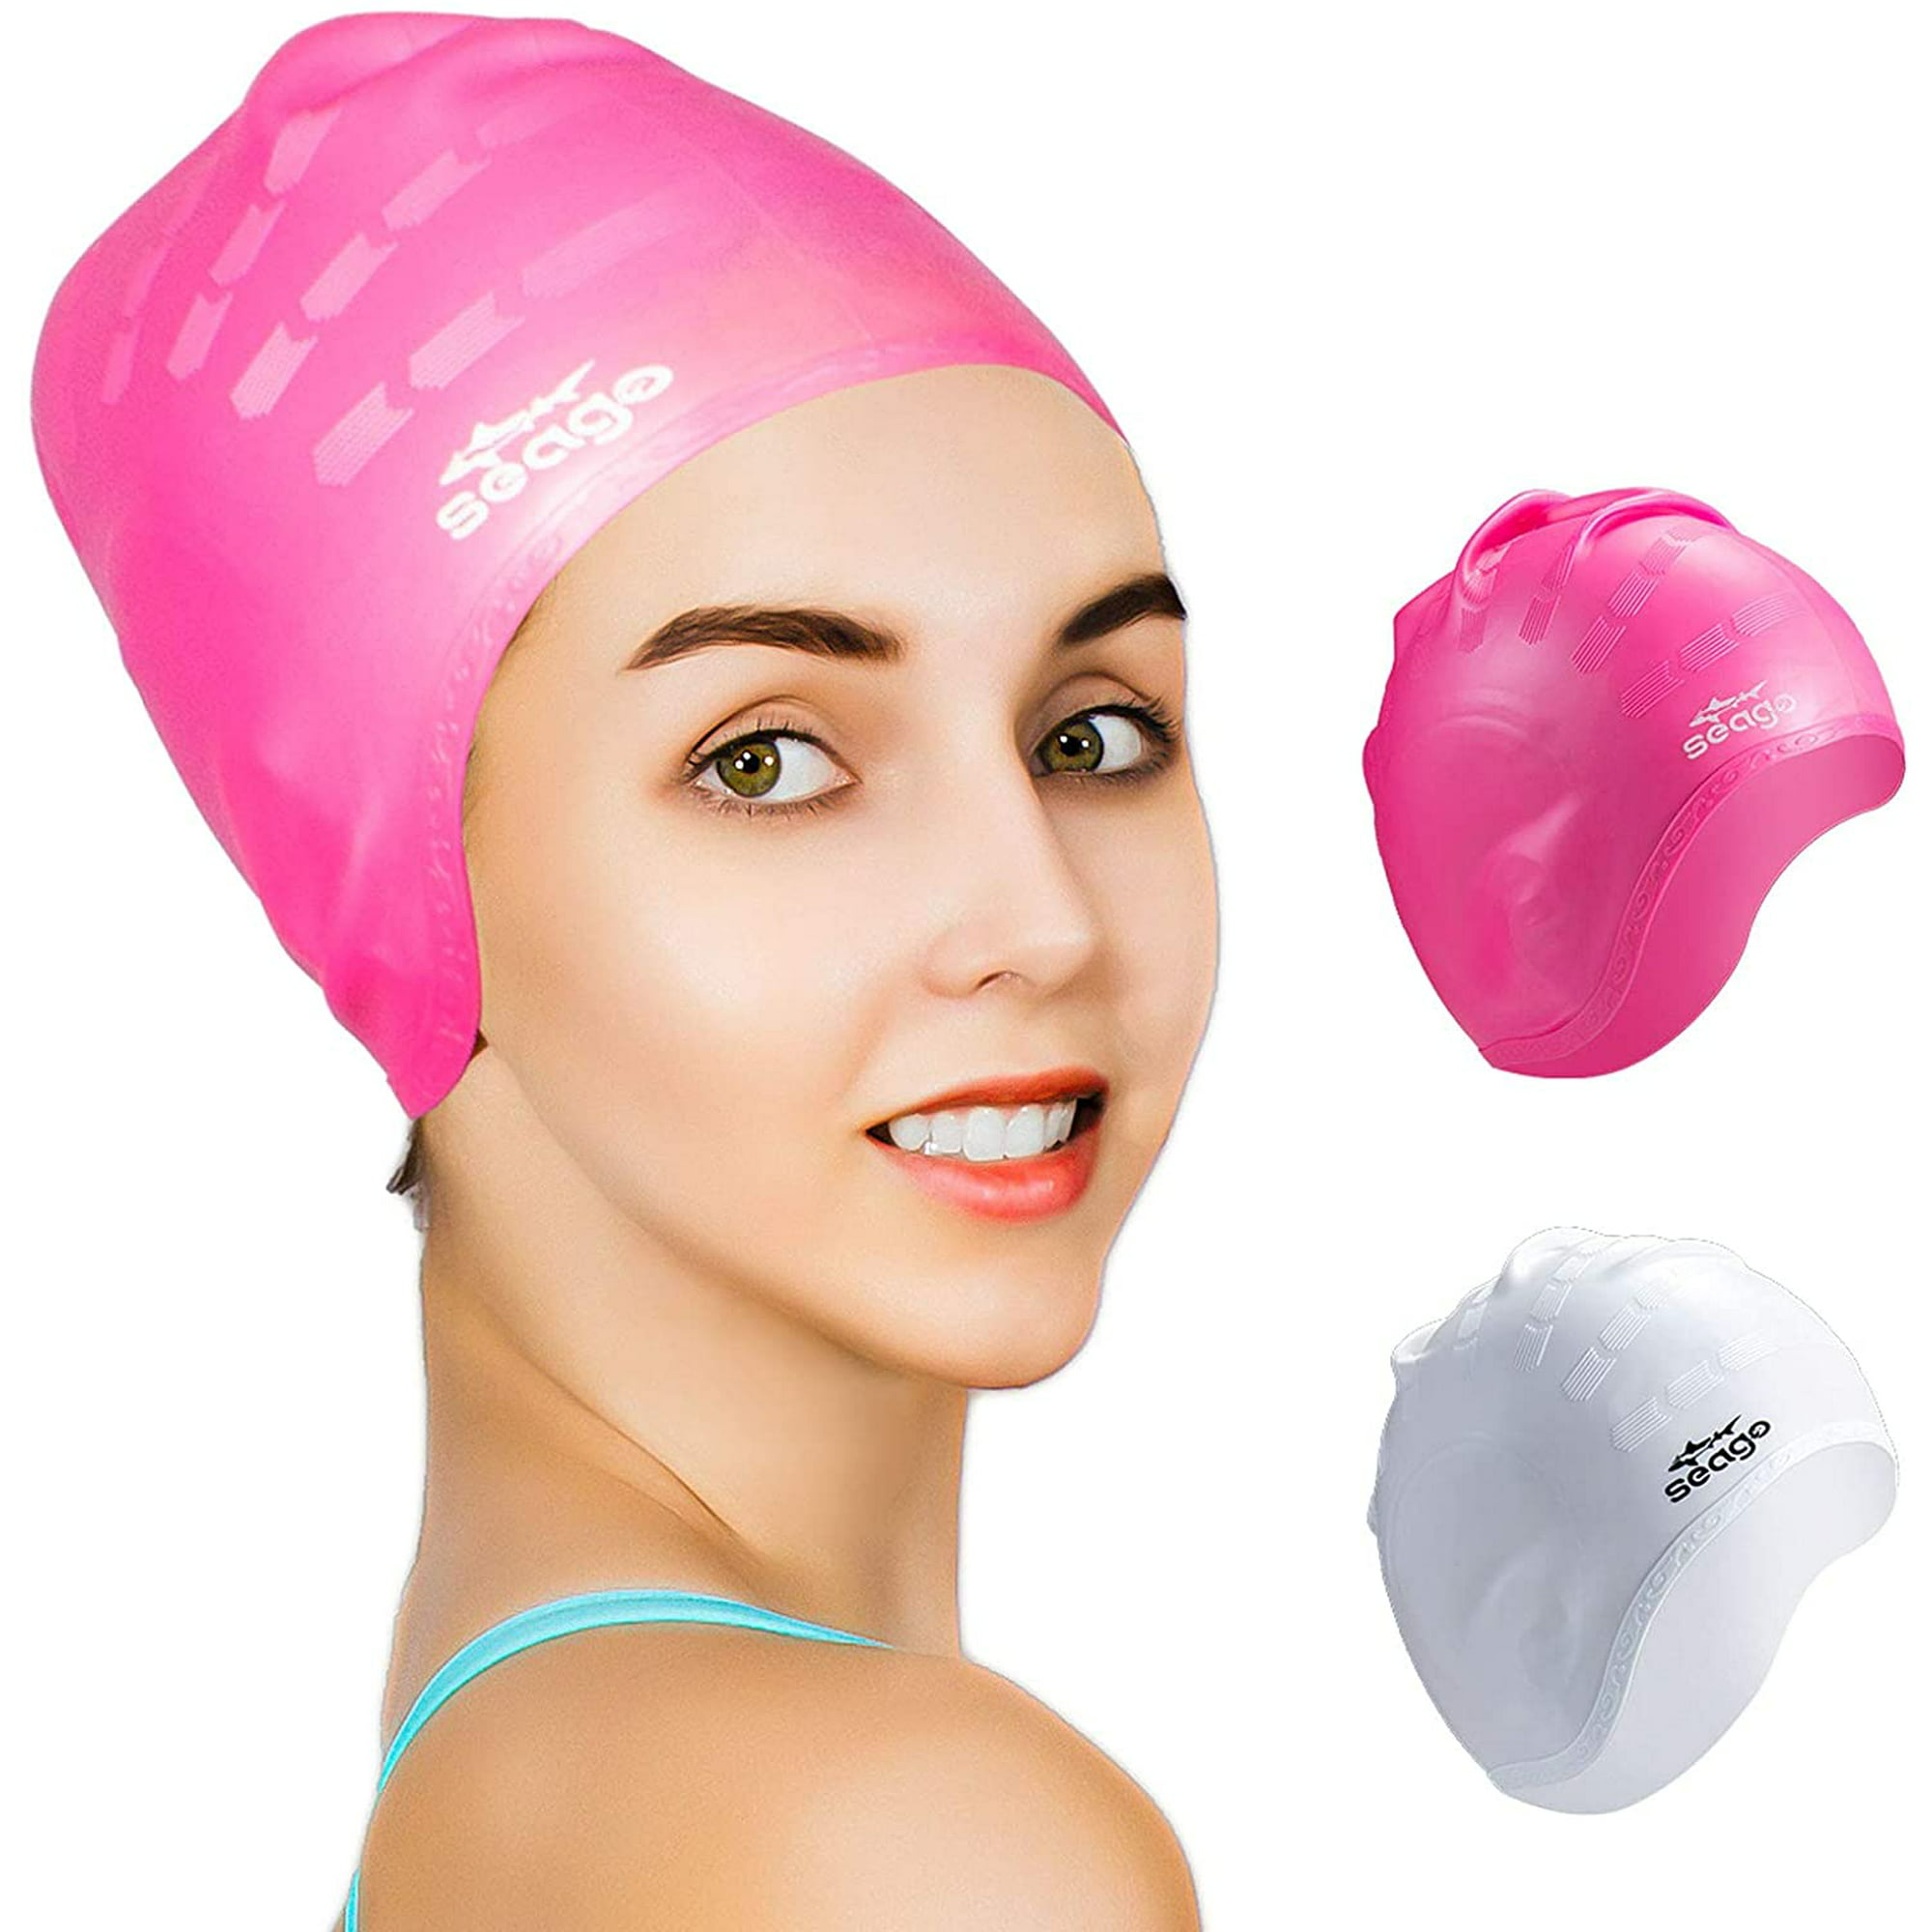 Silicone Swimming Cap for Long Hair,3D Ergonomic Design Silicone Swimming  Caps for Women Kids Men Adults Boys Girls with Ear Plug and Nose Clip |  Walmart Canada